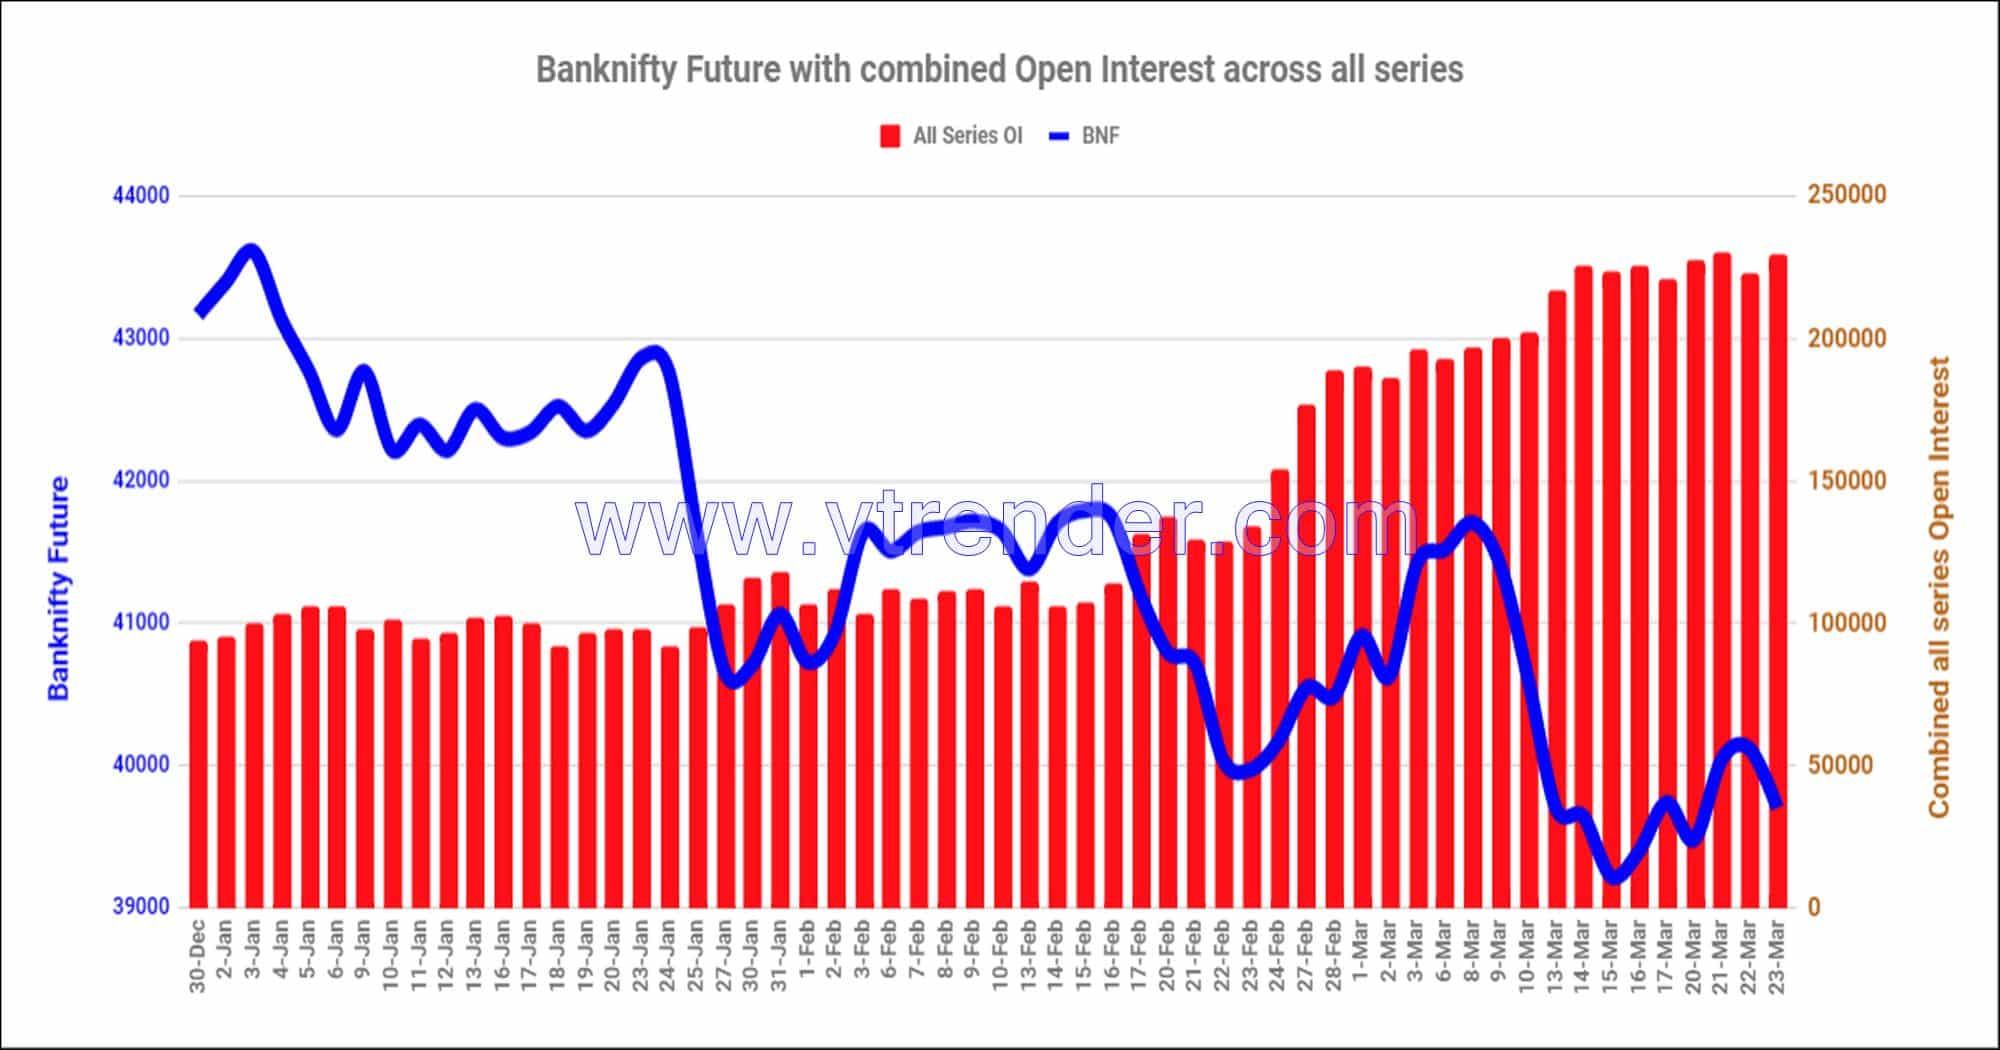 Bnf23Mar Nifty And Banknifty Futures With All Series Combined Open Interest – 23Rd Mar 2023 Banknifty, Nifty, Open Interest